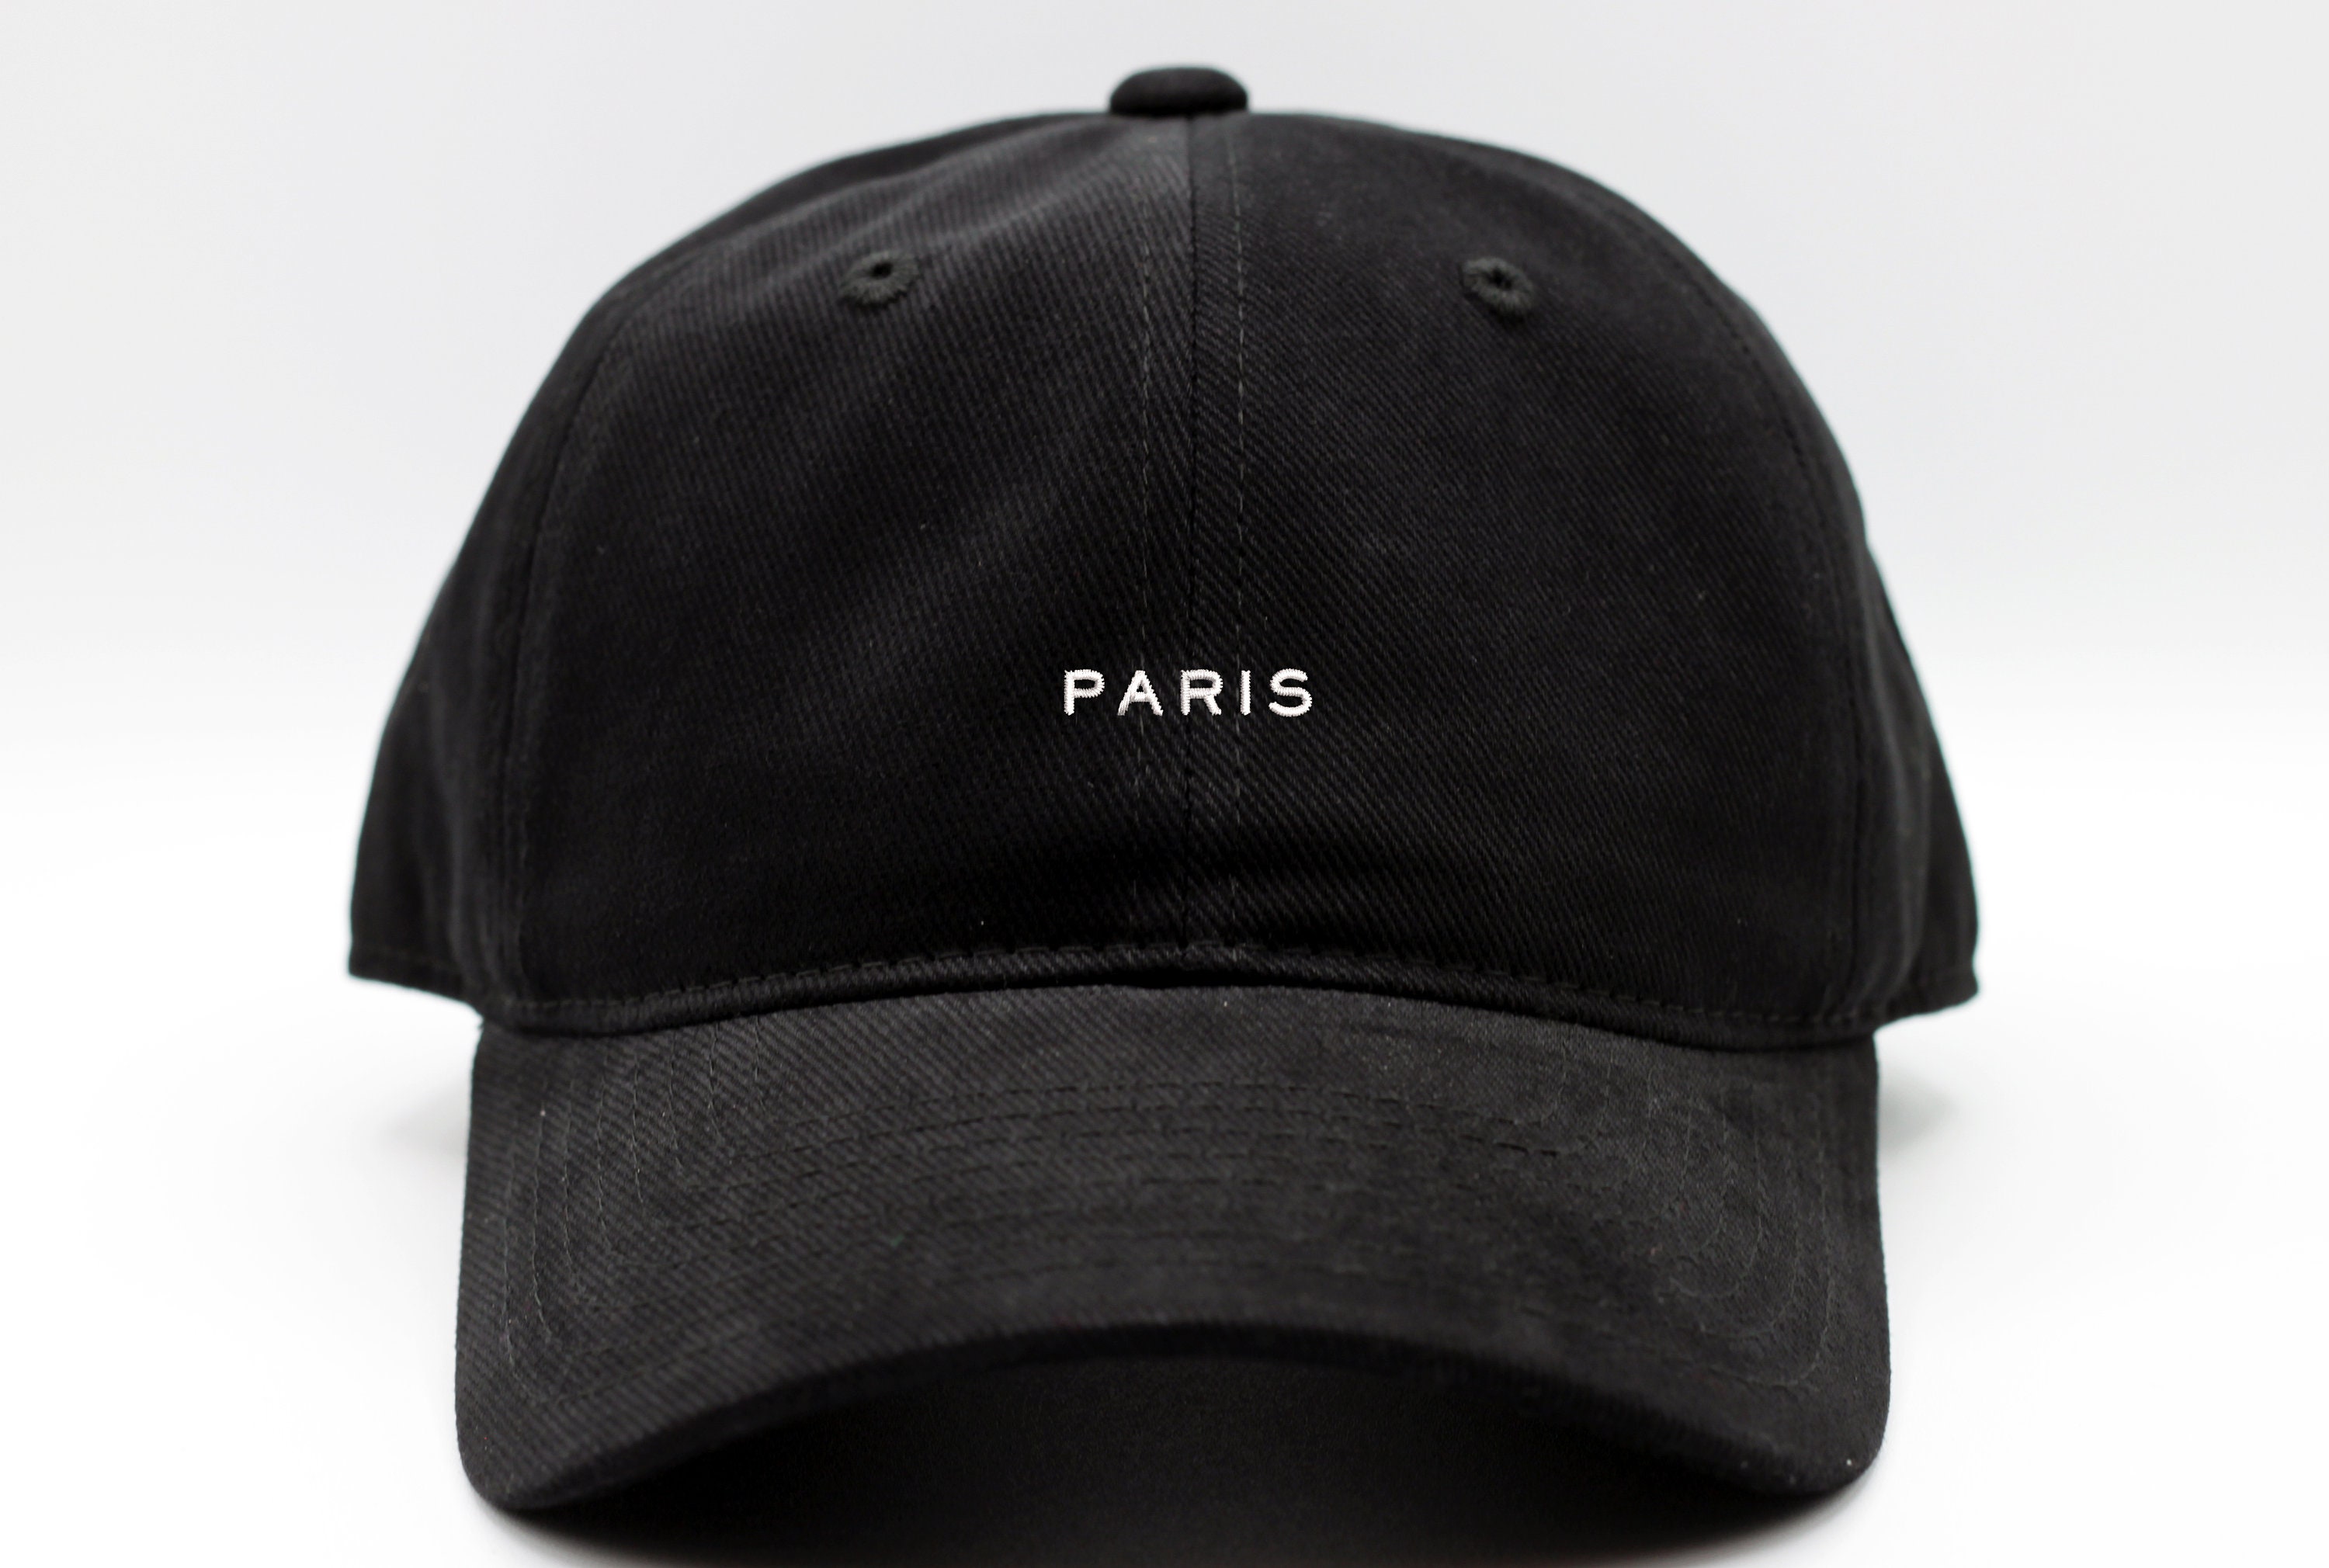 ySL Embroidered Baseball Cap · La KASUAL Mode · Online Store